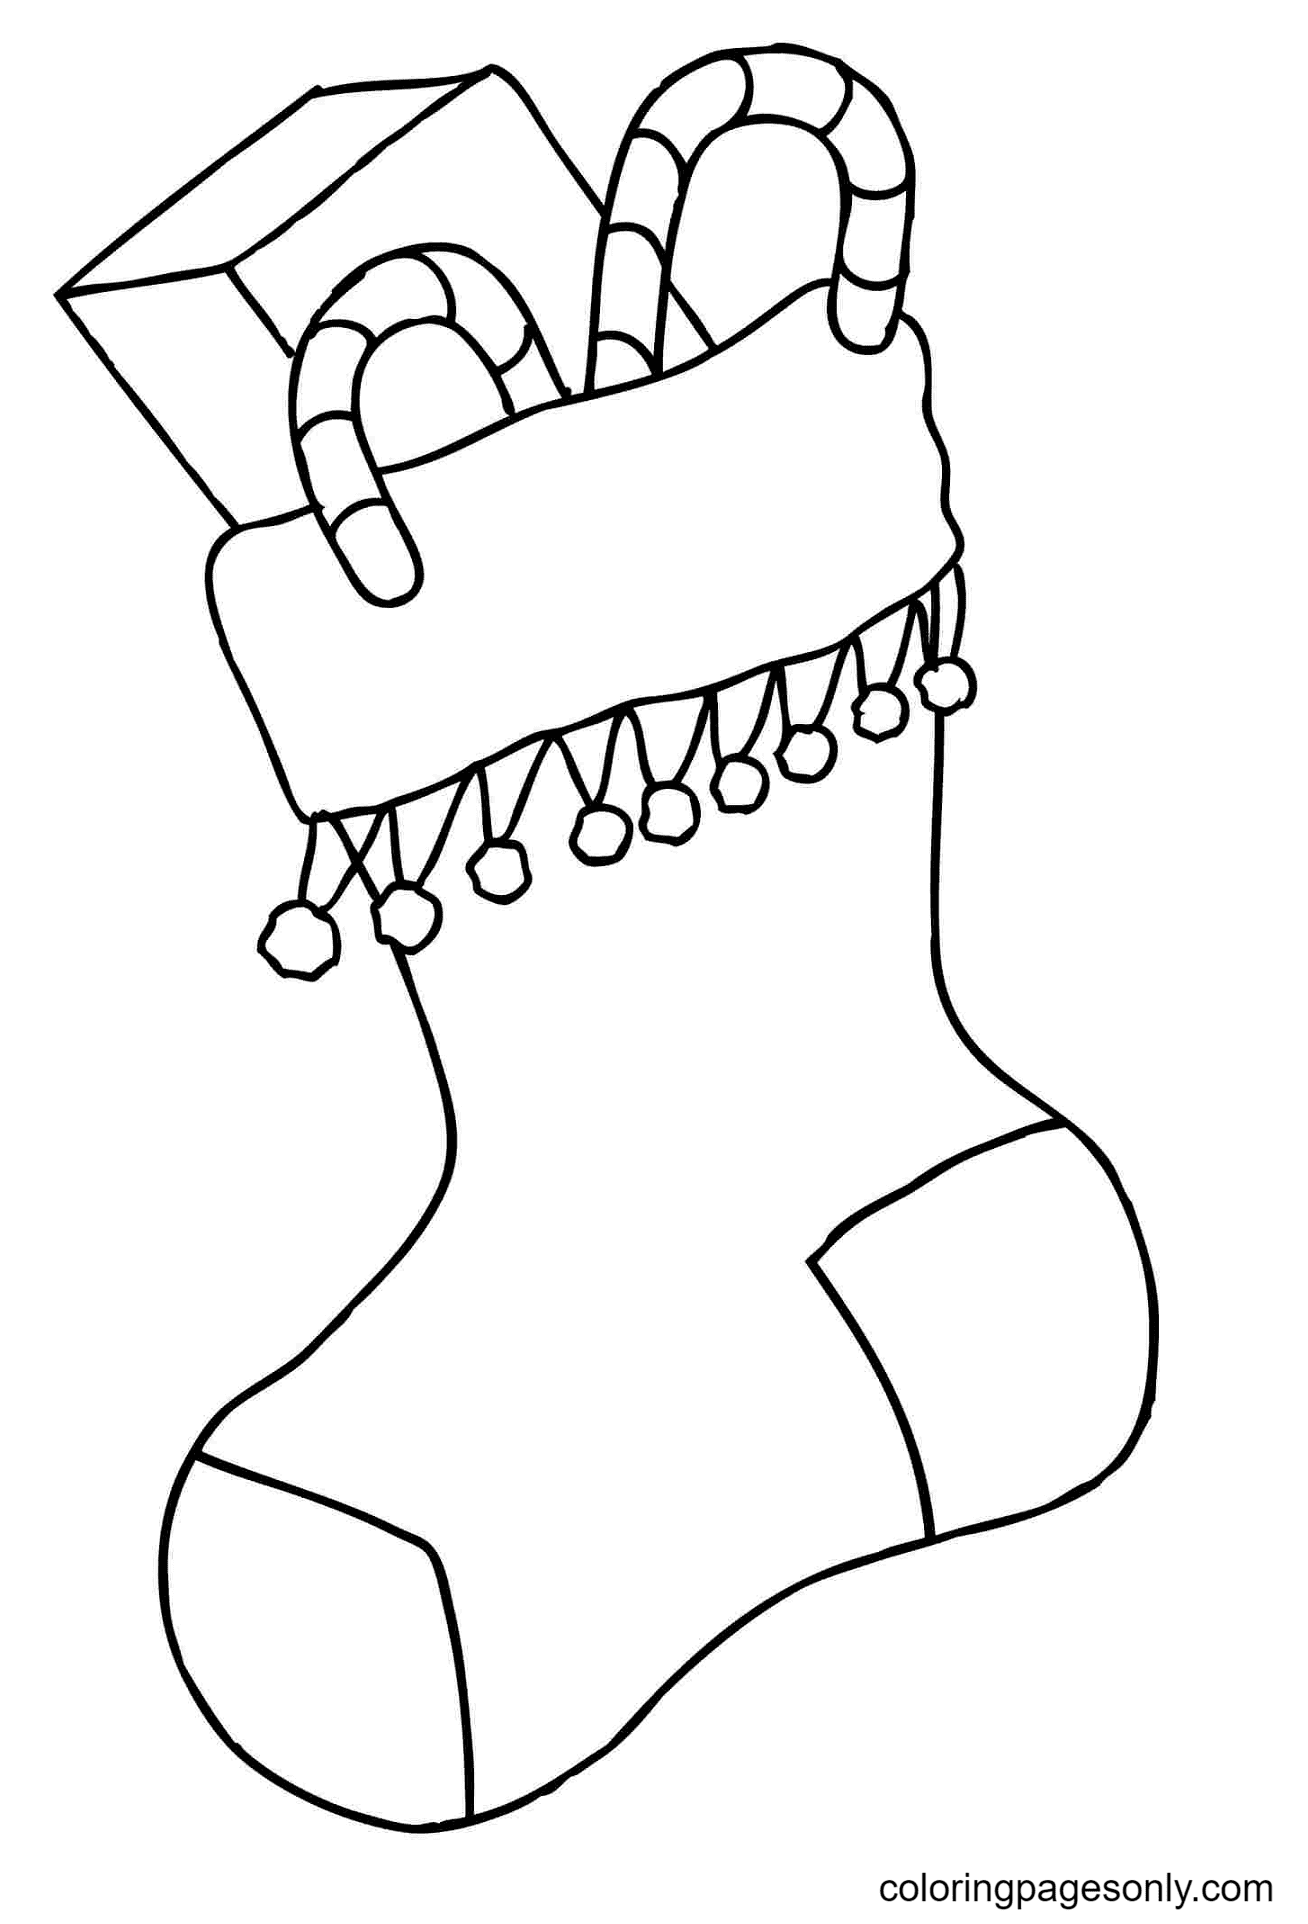 printable-christmas-stockings-coloring-pages-christmas-stockings-coloring-pages-coloring